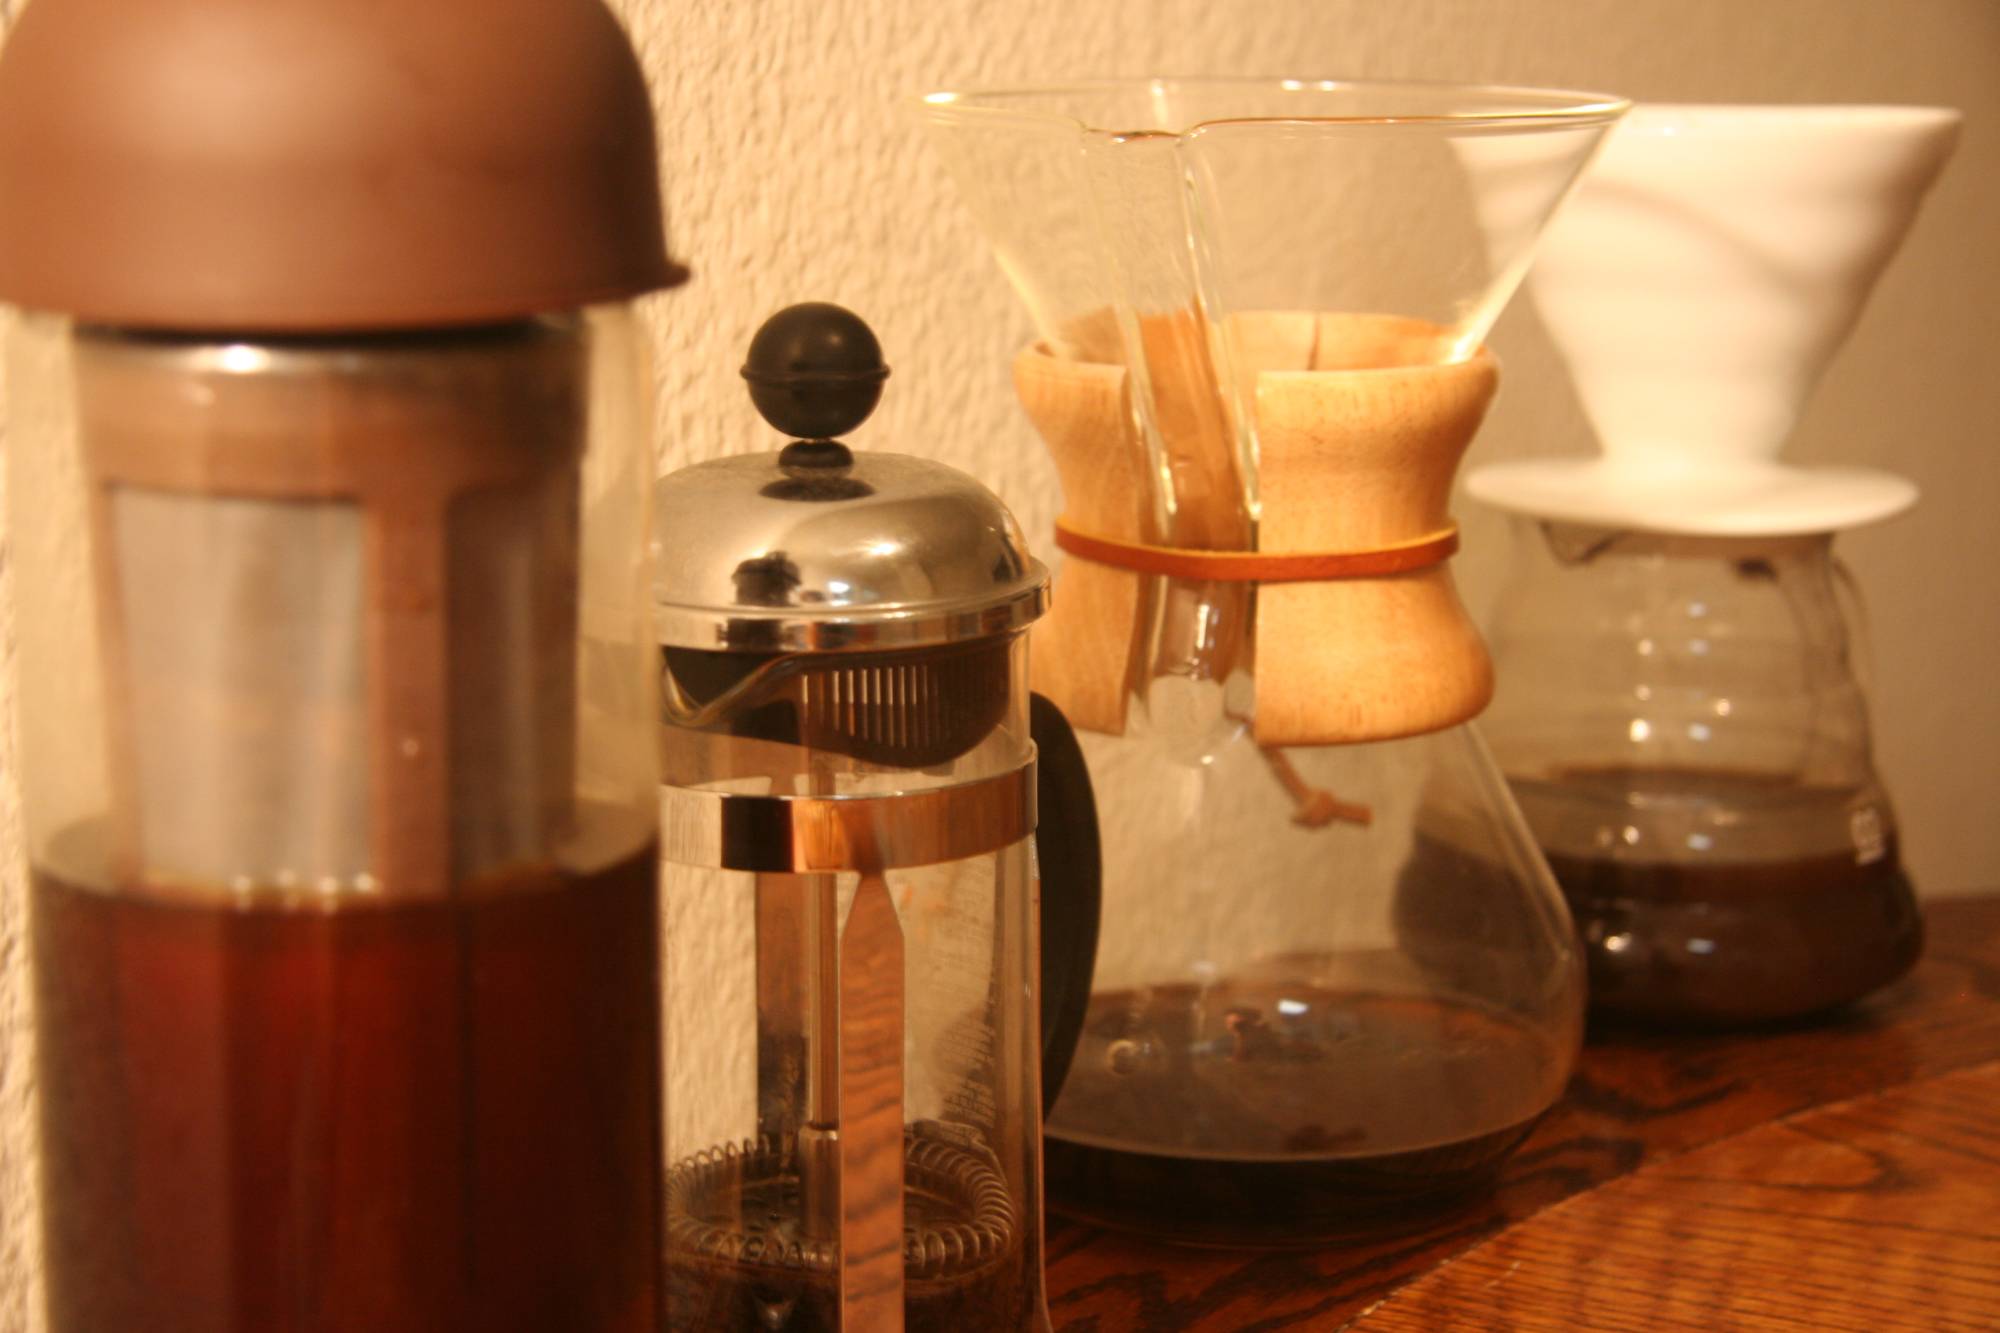 How to make perfect French Press Coffee, Instructions